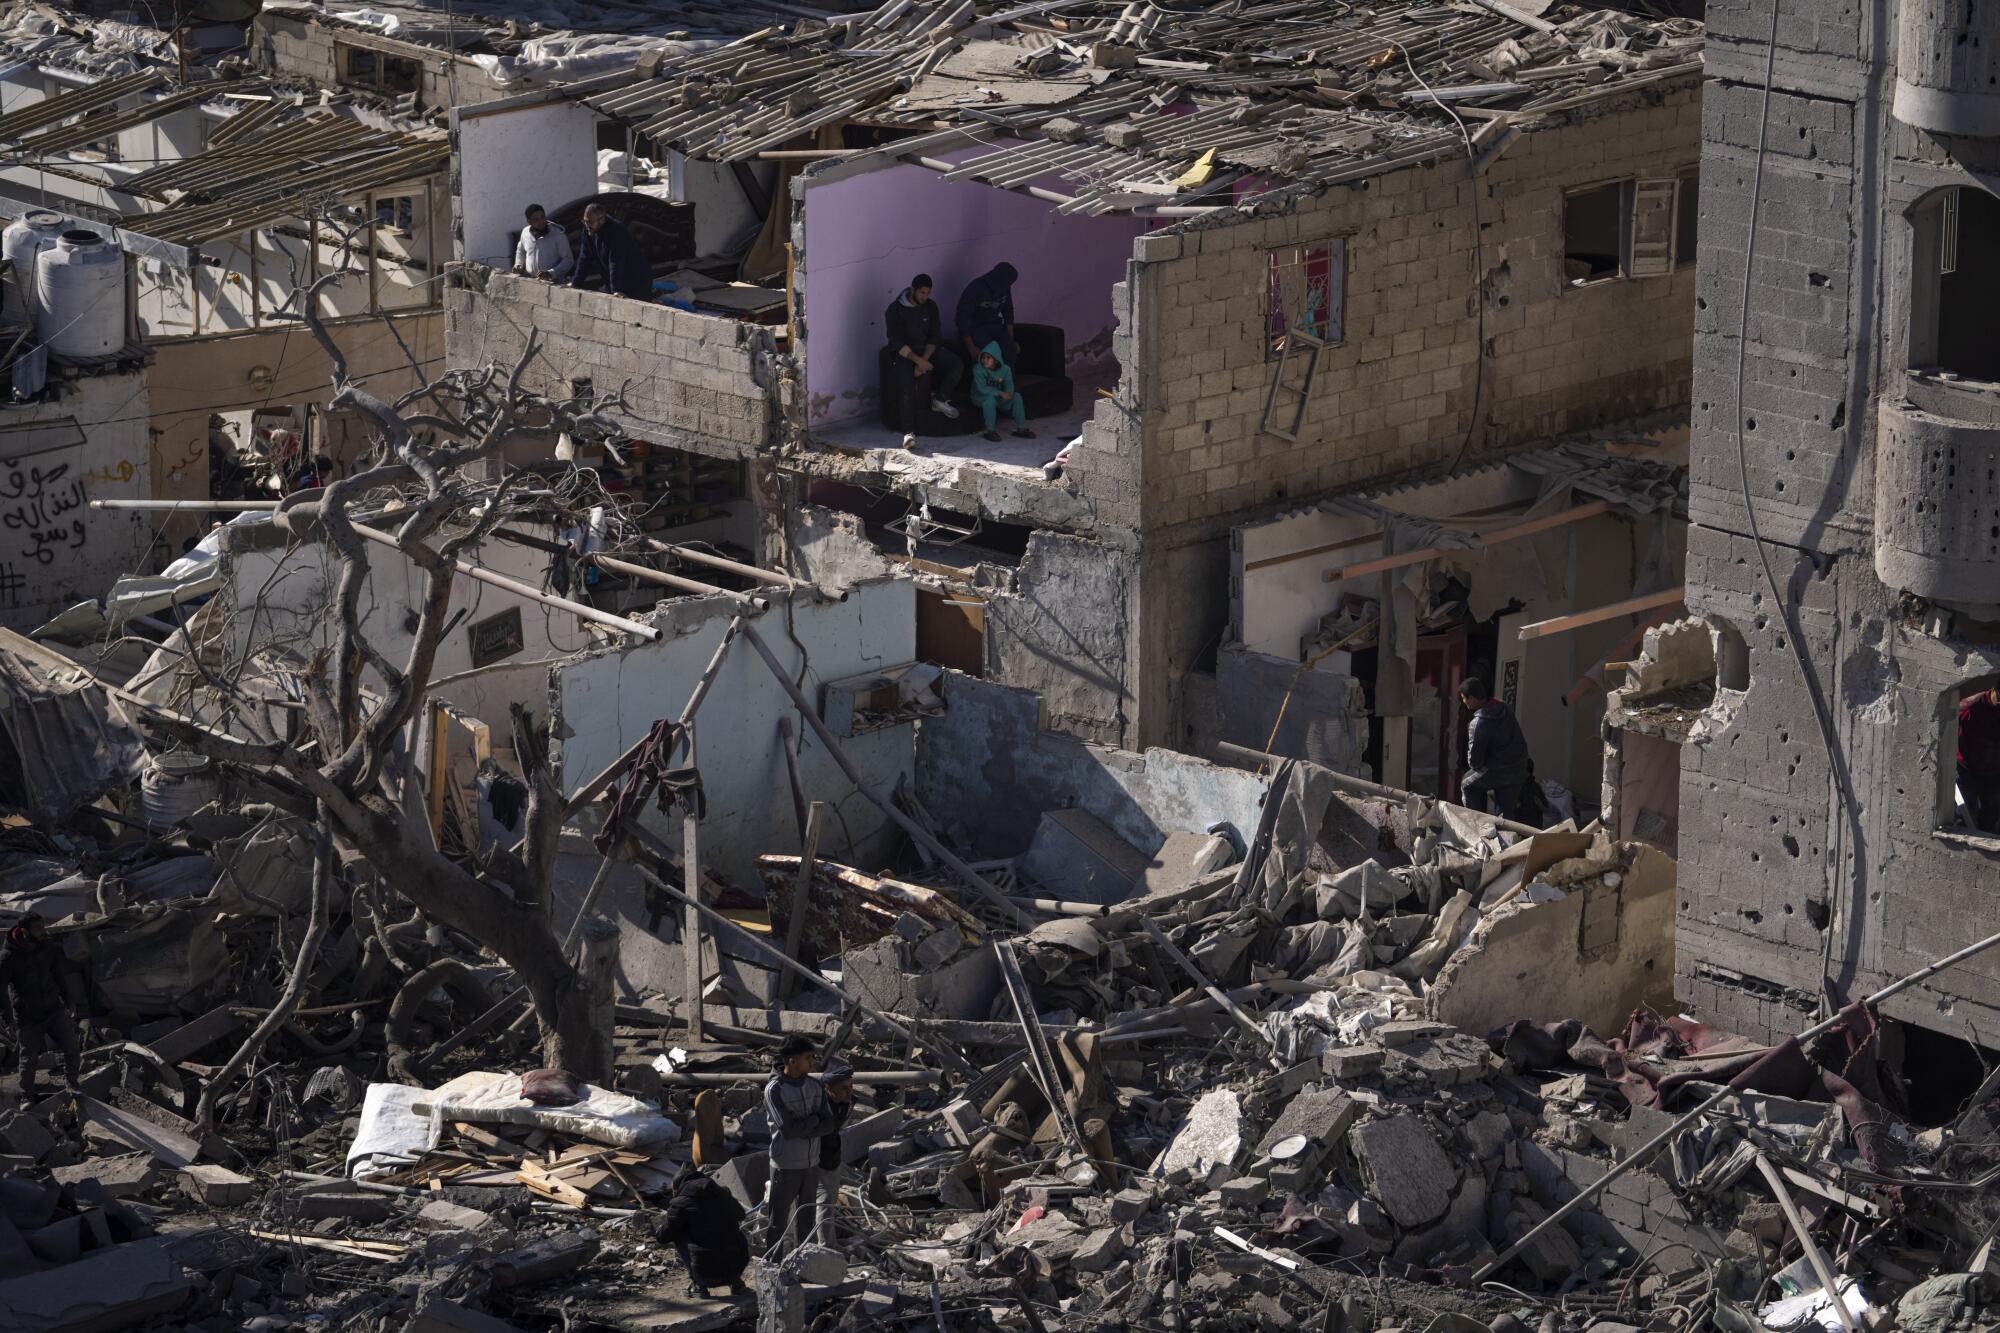 People sitting in what's left of a room as others survey the rubble of bombed-out buildings